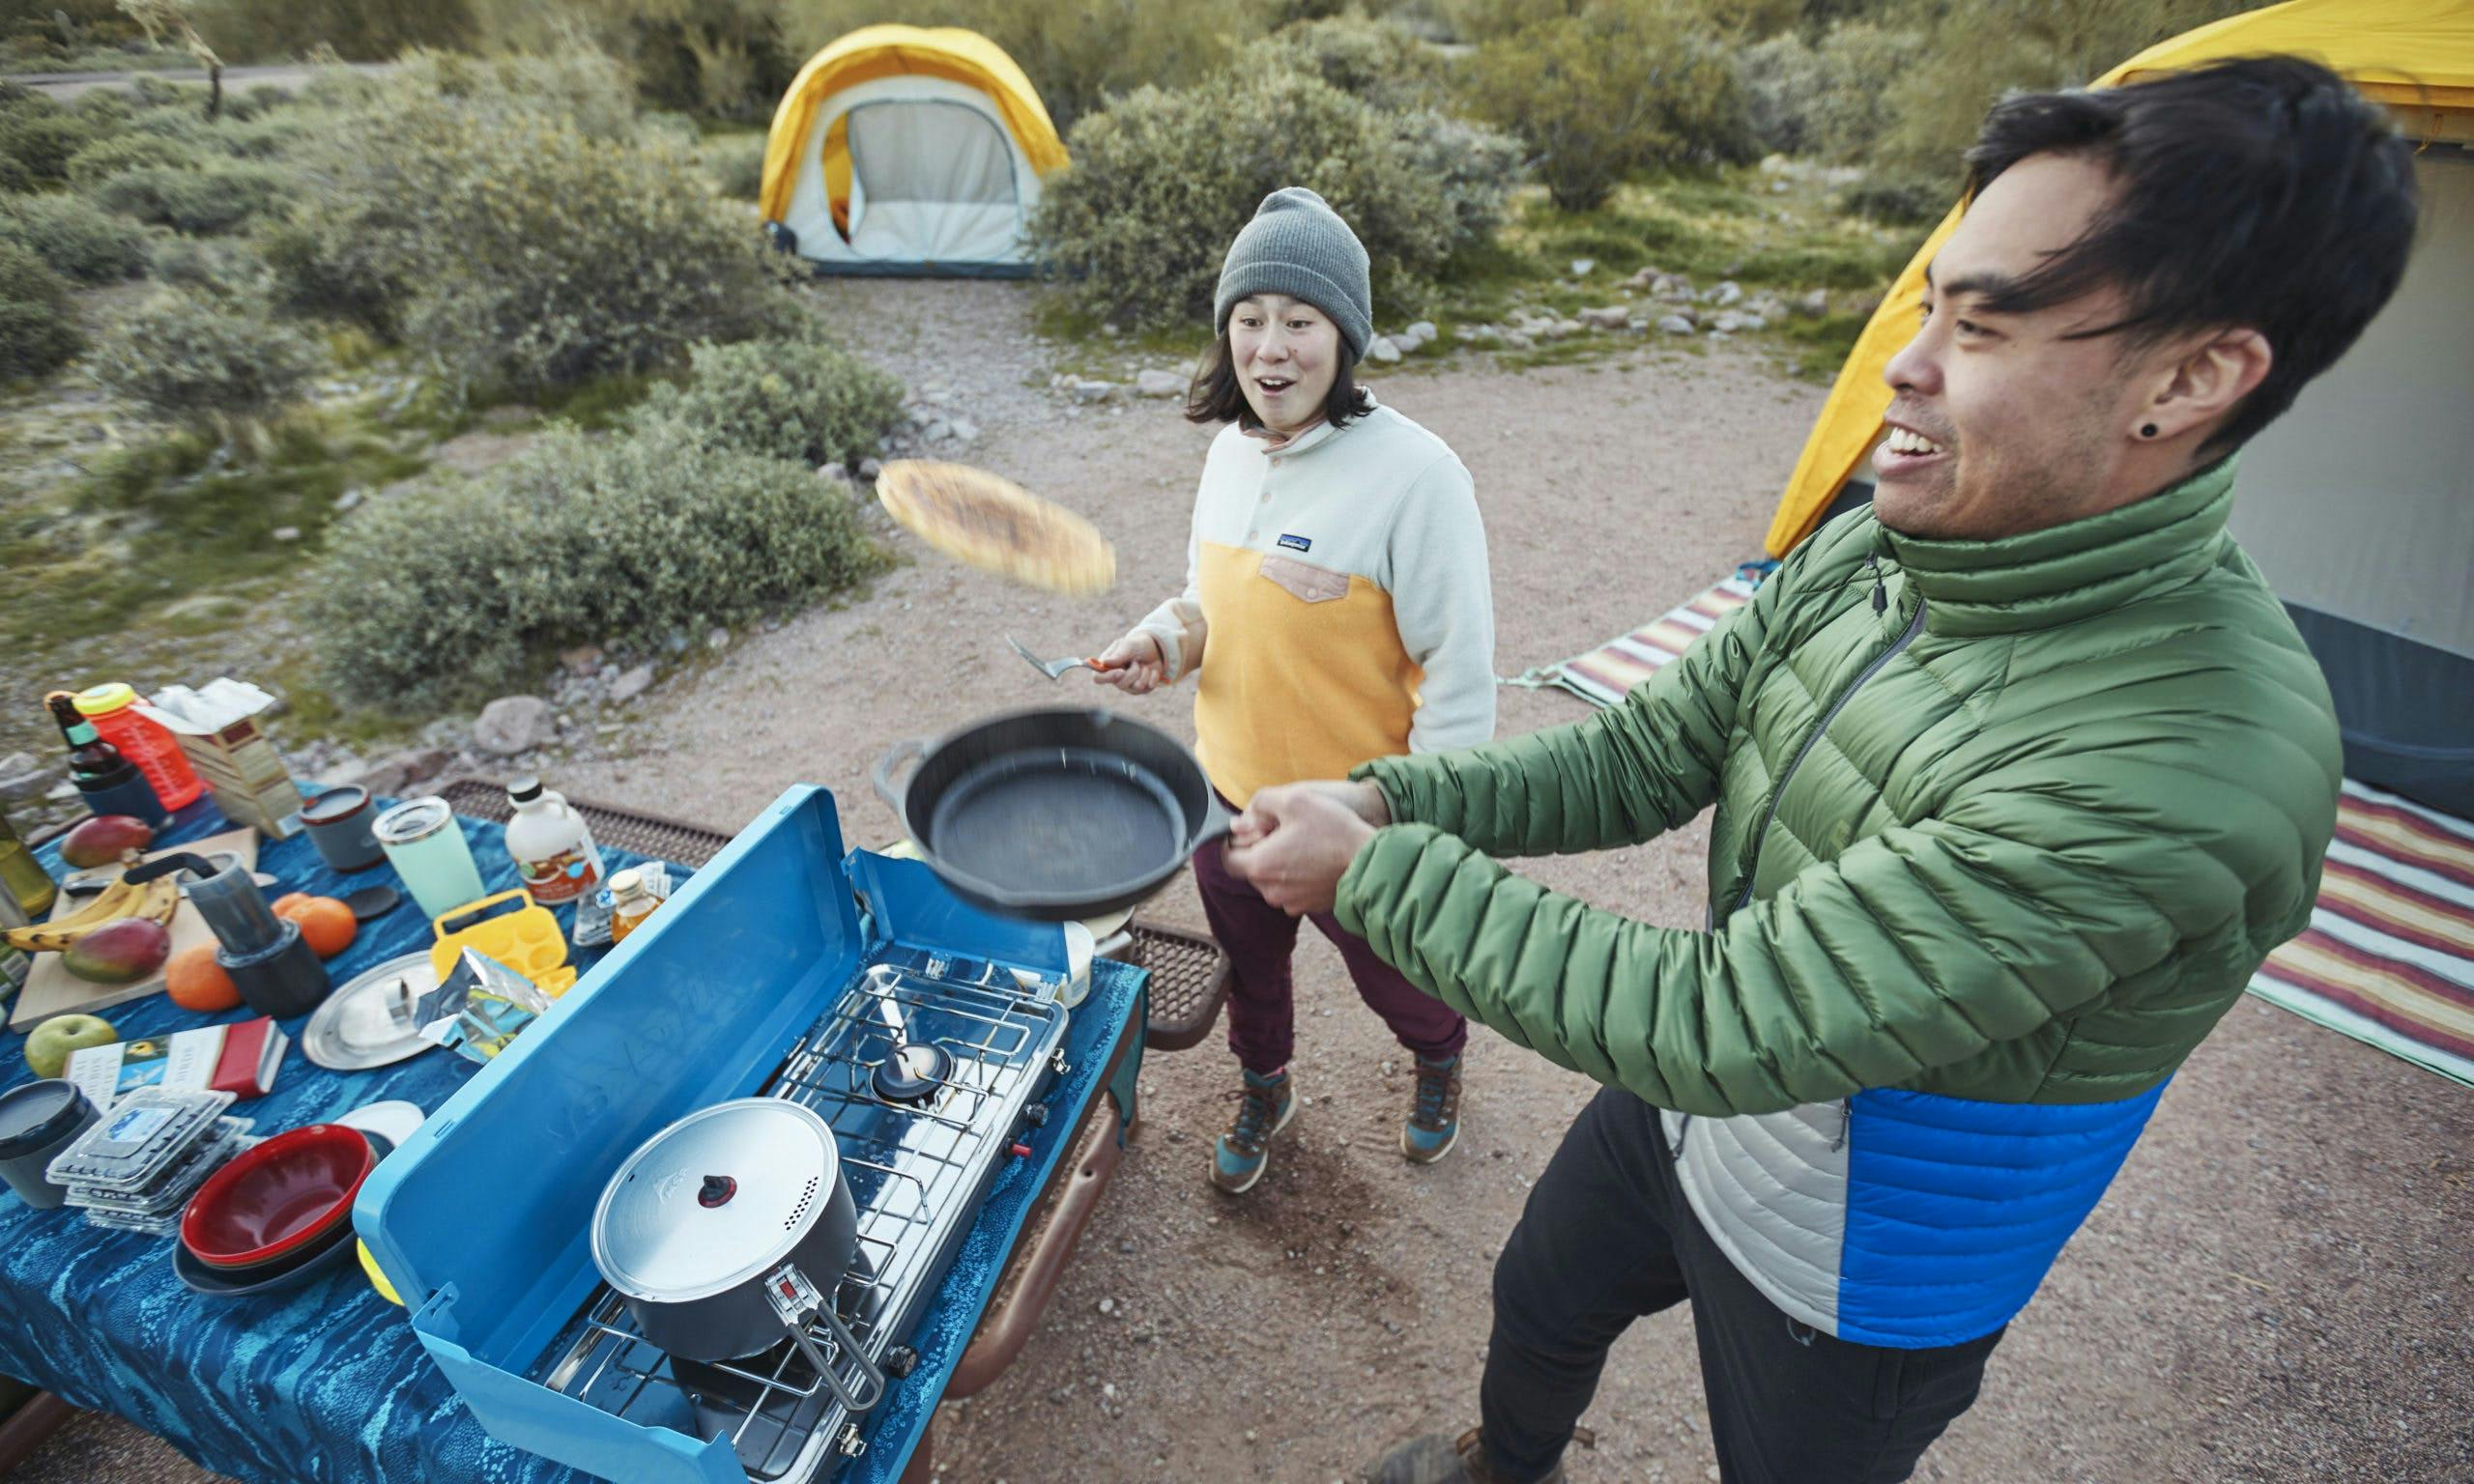 Camper flipping a pancake with tents and another camper in the background